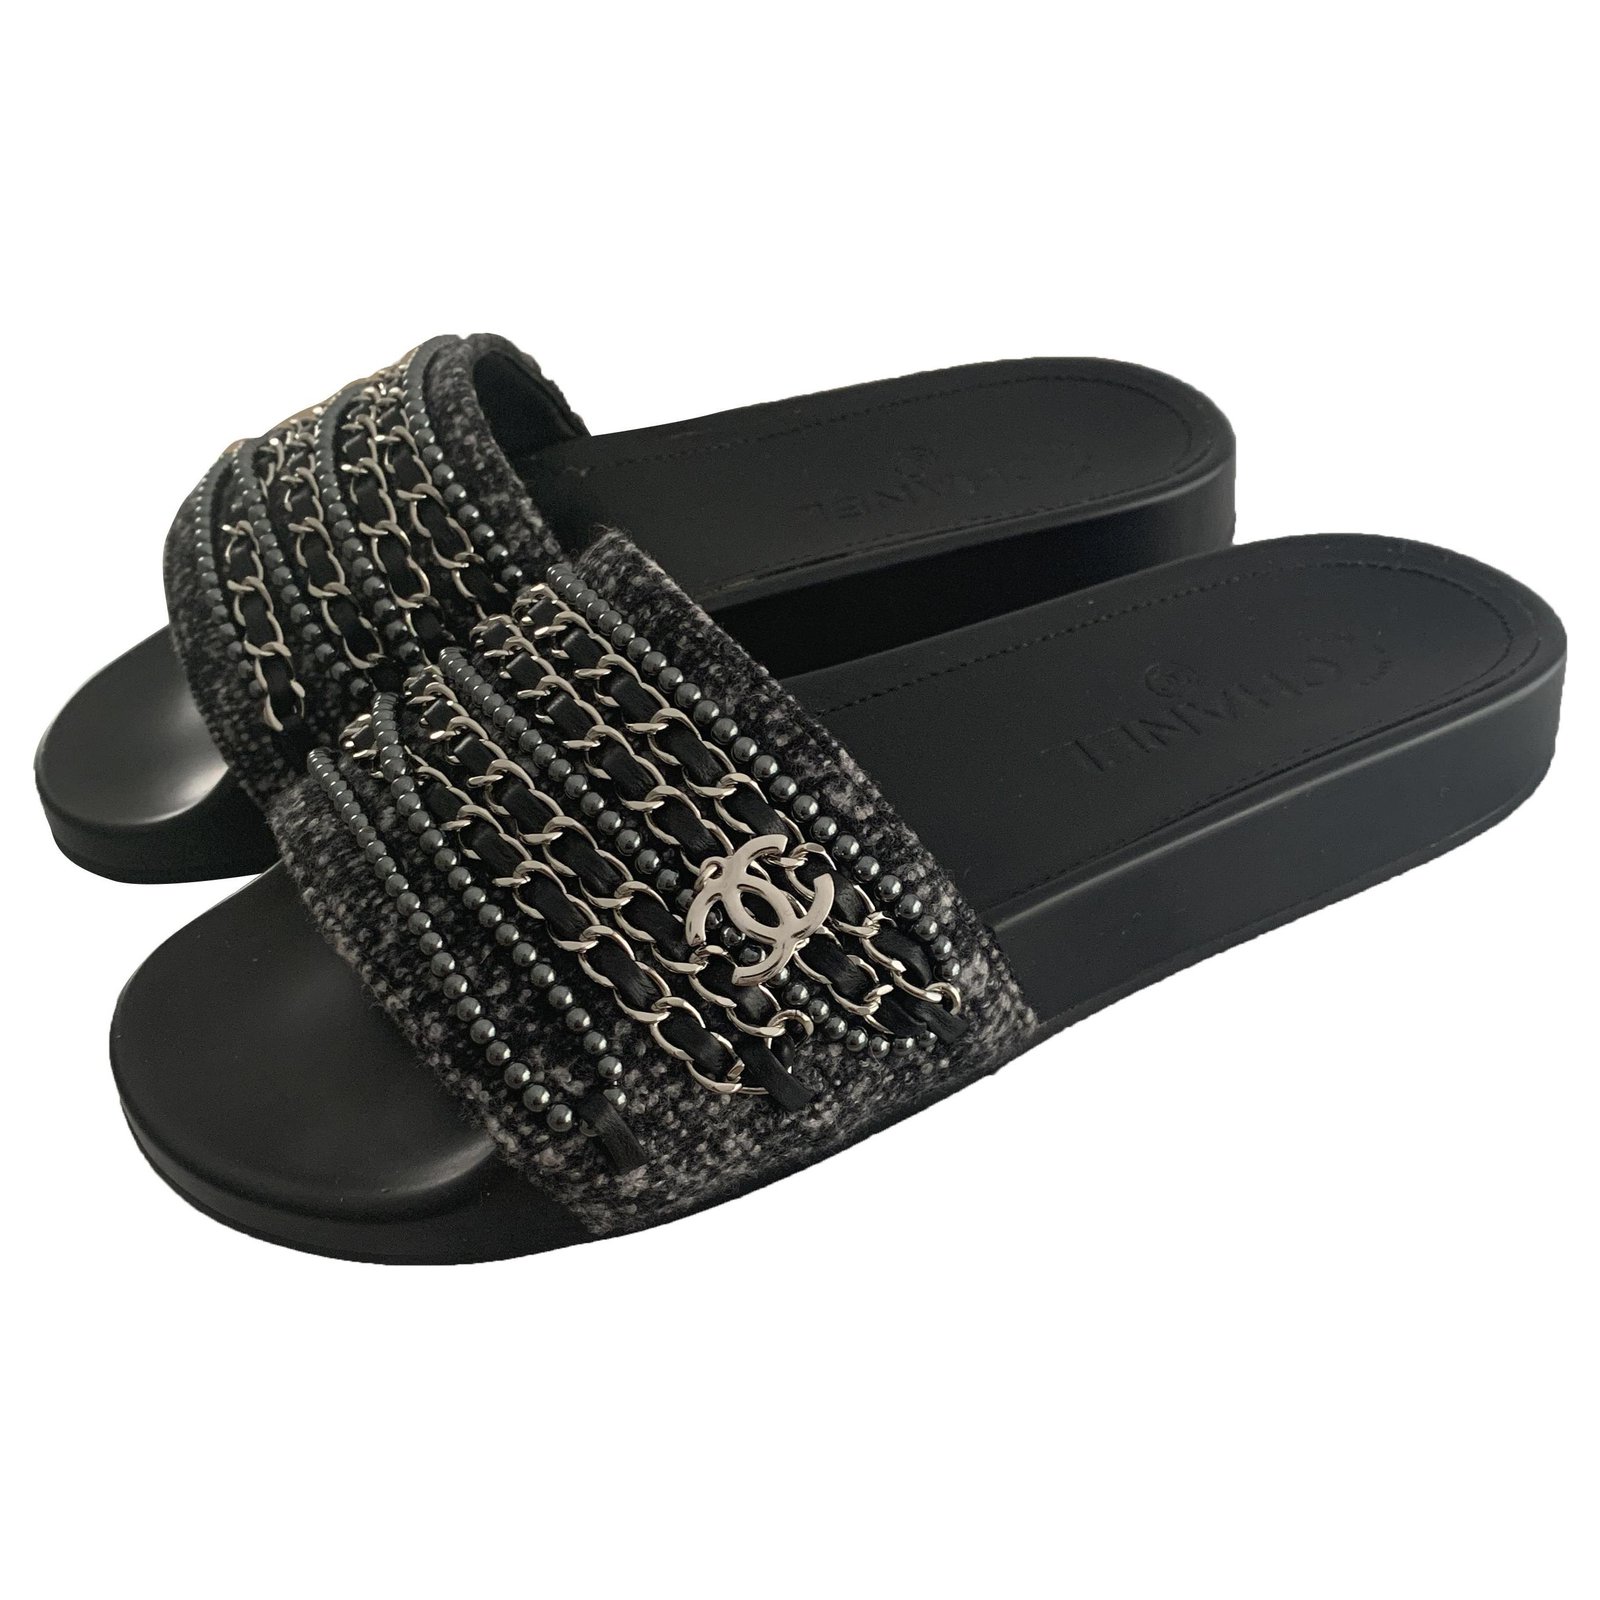 Chanel sandals mules